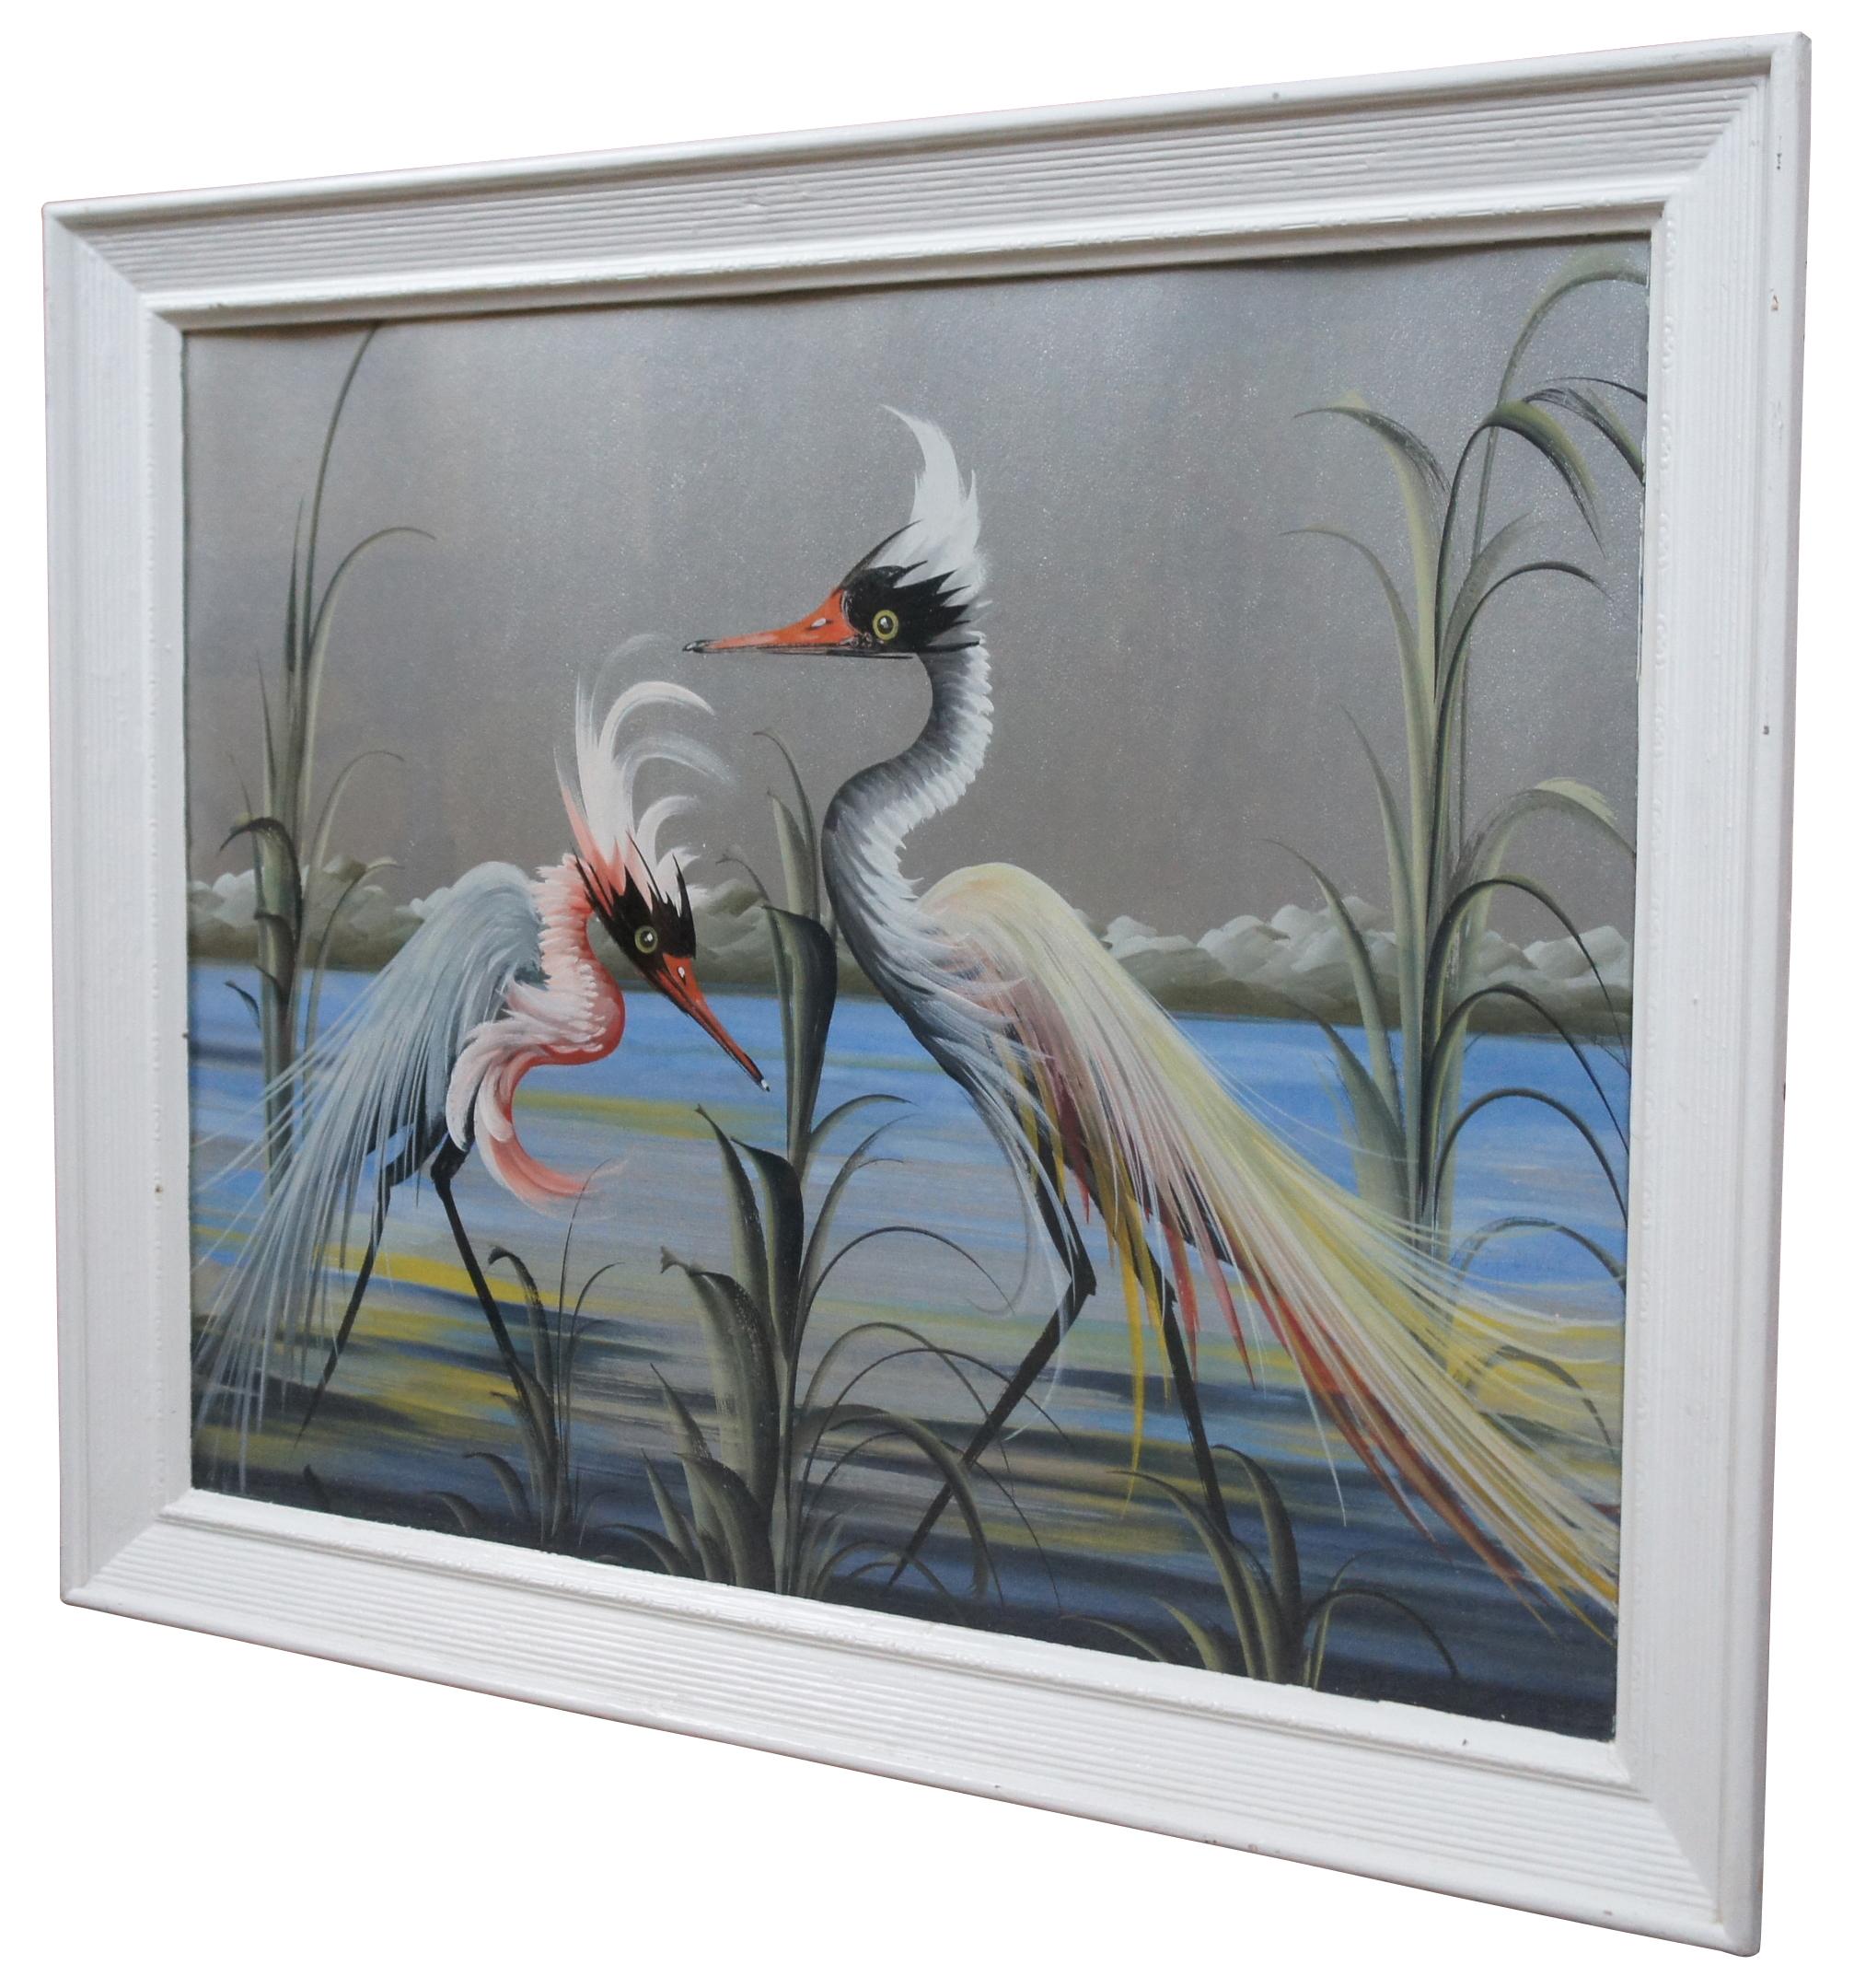 Vintage painting on metallic silver paper of a lake landscape featuring two herons or cranes with long feathered crests and tails.

Measures: Sans frame - 27.25” x 21.25”.